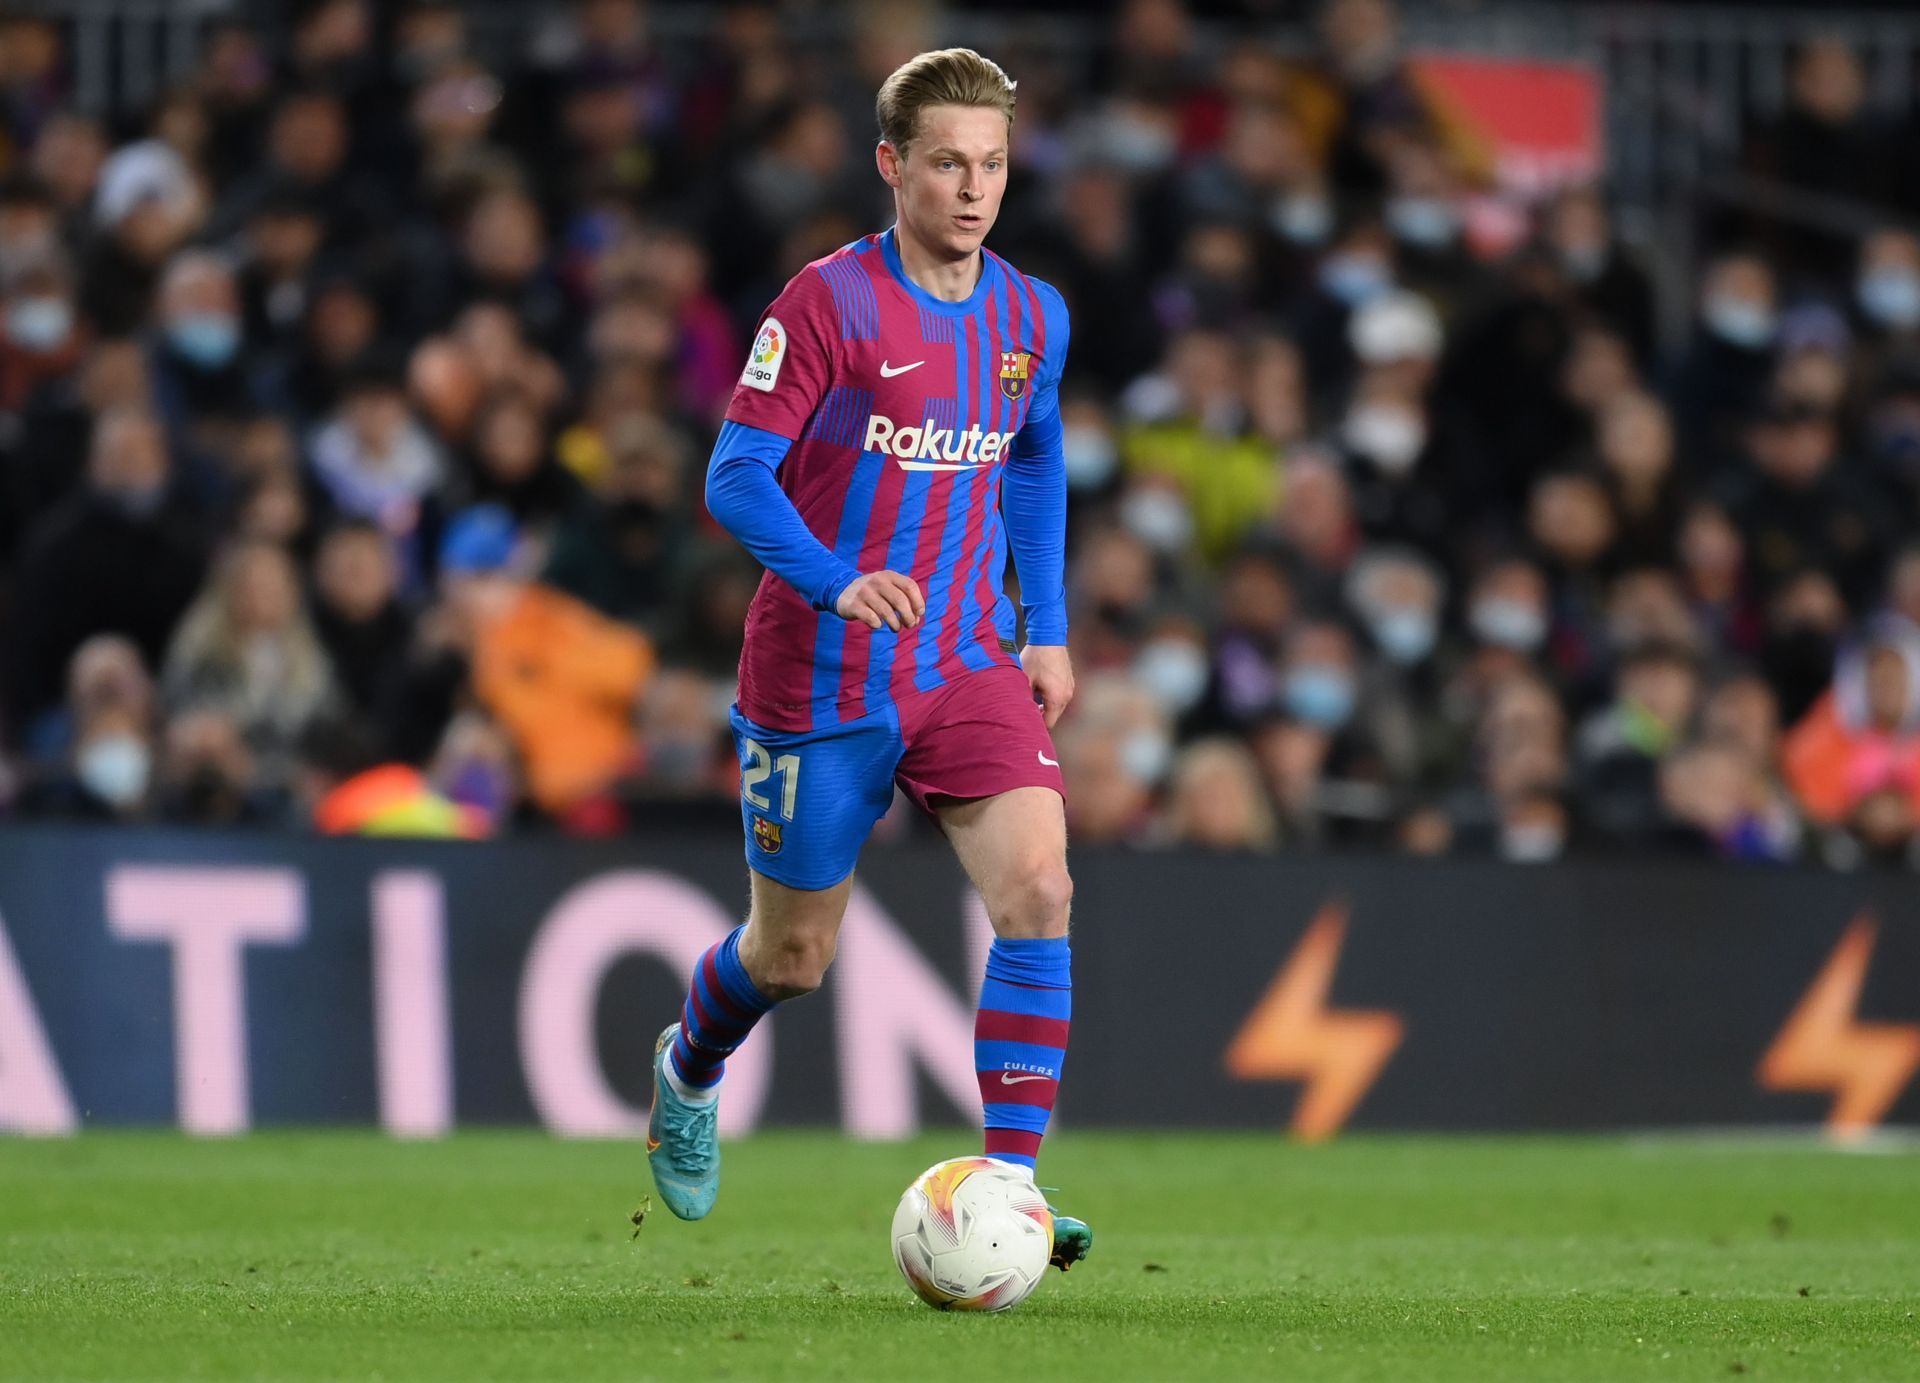 Frenkie de Jong has been heavily linked with a move to Old Trafford